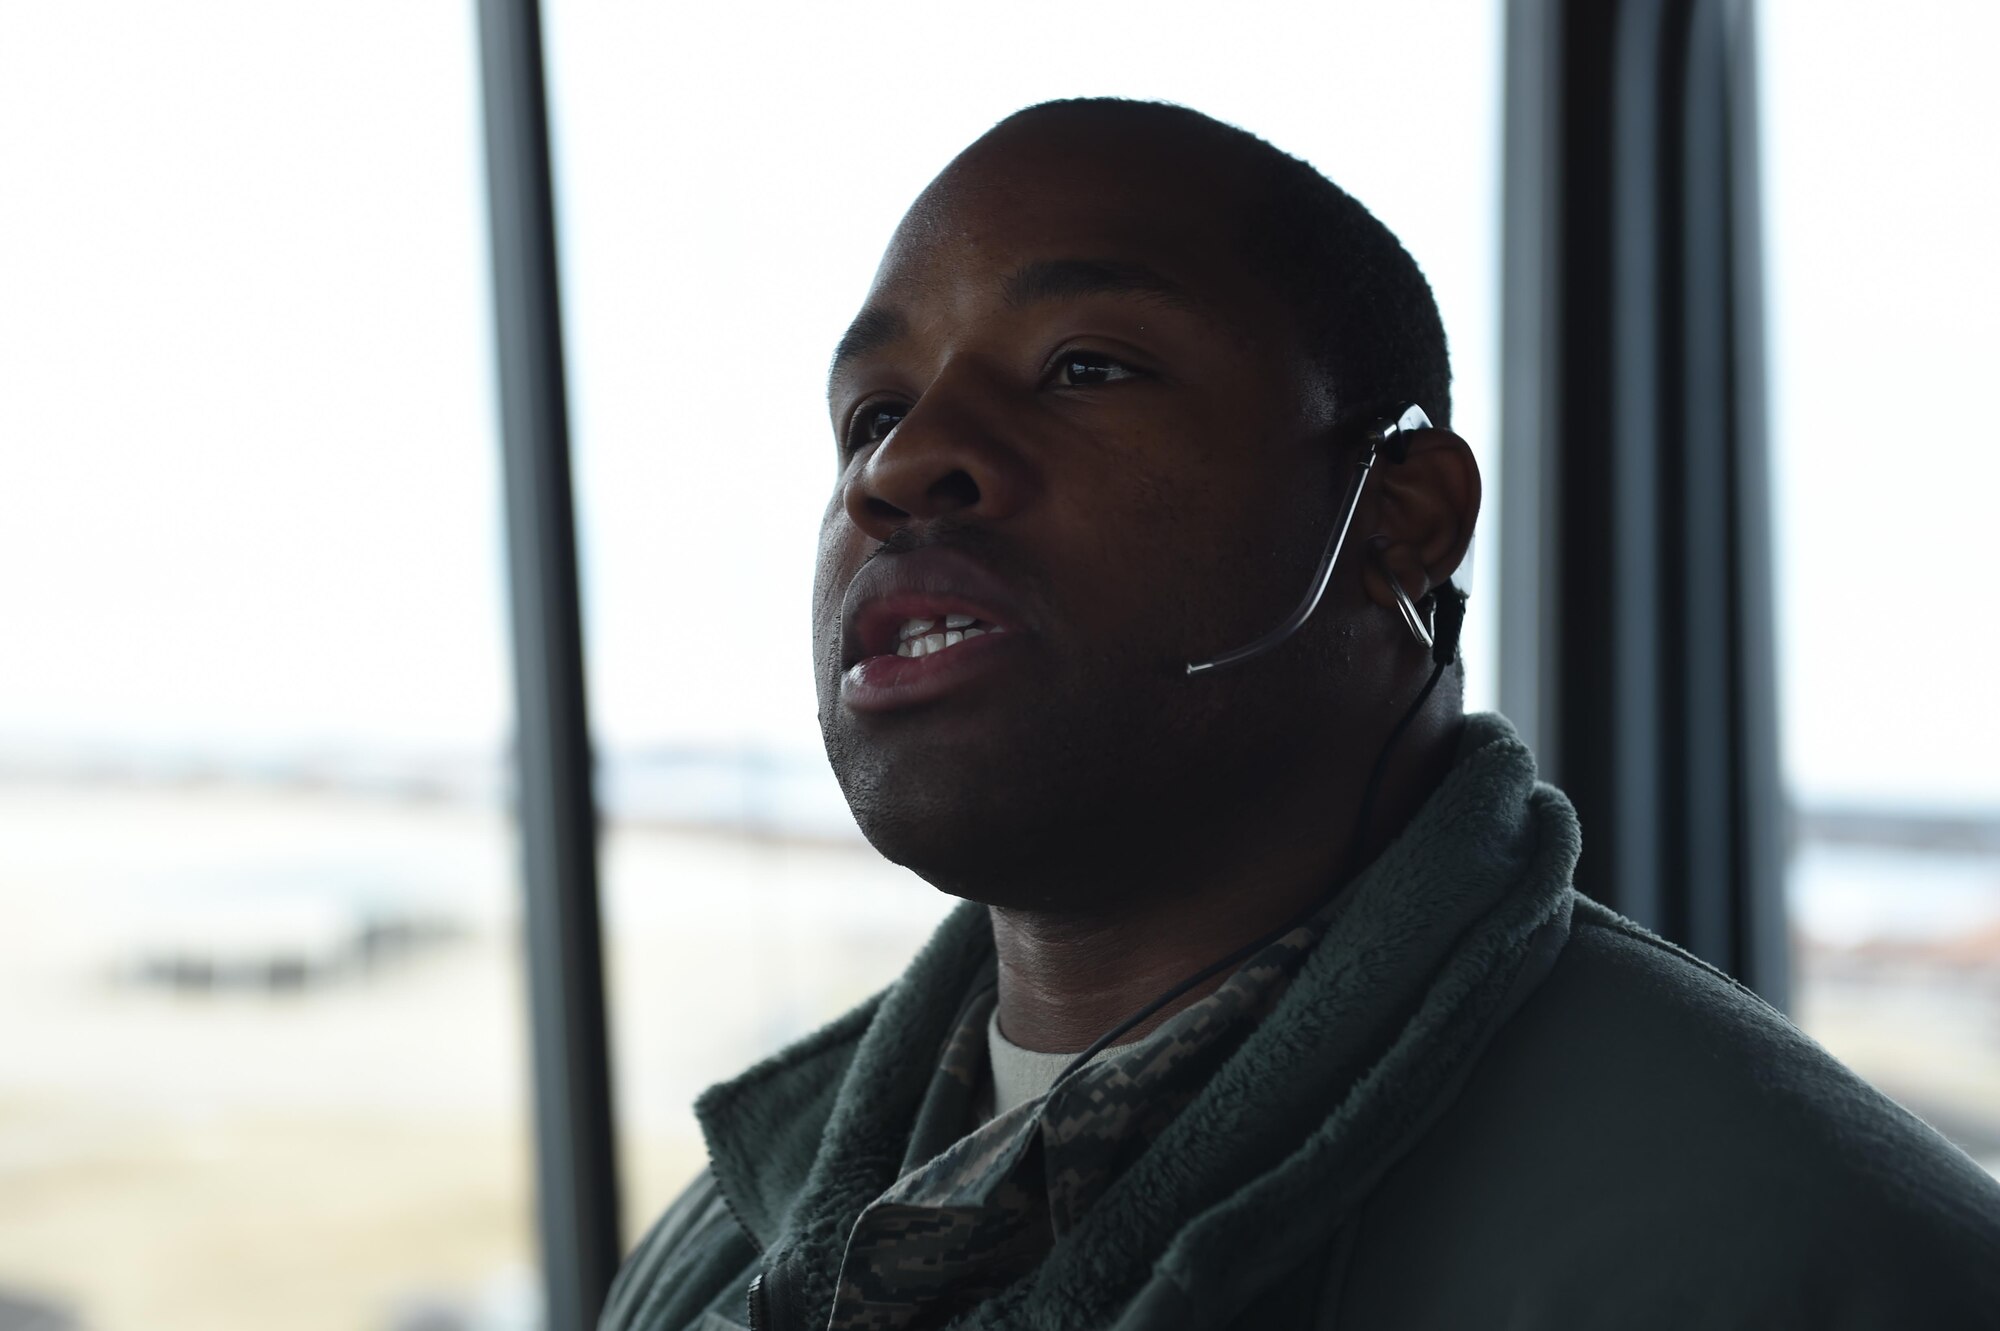 U.S. Air Force Senior Airman Chino Ross, 1st Operations Support Squadron air traffic controller, communicates with airfield members at Joint Base Langley-Eustis, Va., Dec. 16, 2016. The aircraft control tower supports approximately 30,000 missions annually and communicates with local flight facilities to coordinate safe air traffic. (U.S. Air Force photo by Staff Sgt. Natasha Stannard)